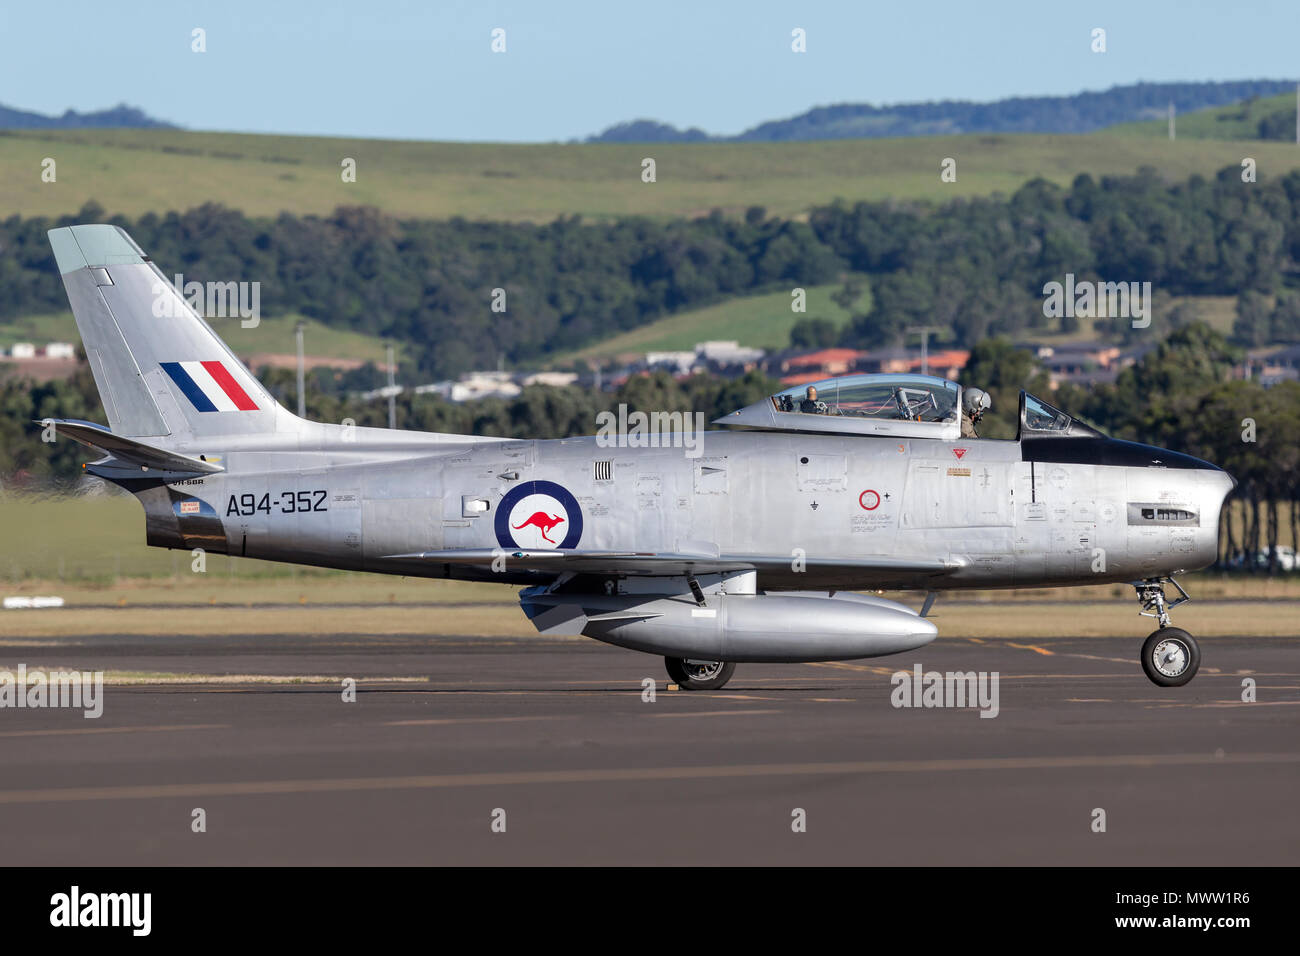 Former Royal Australian Air Force (RAAF) Commonwealth Aircraft Corporation CA-27 (North American F-86) Sabre jet aircraft. Stock Photo